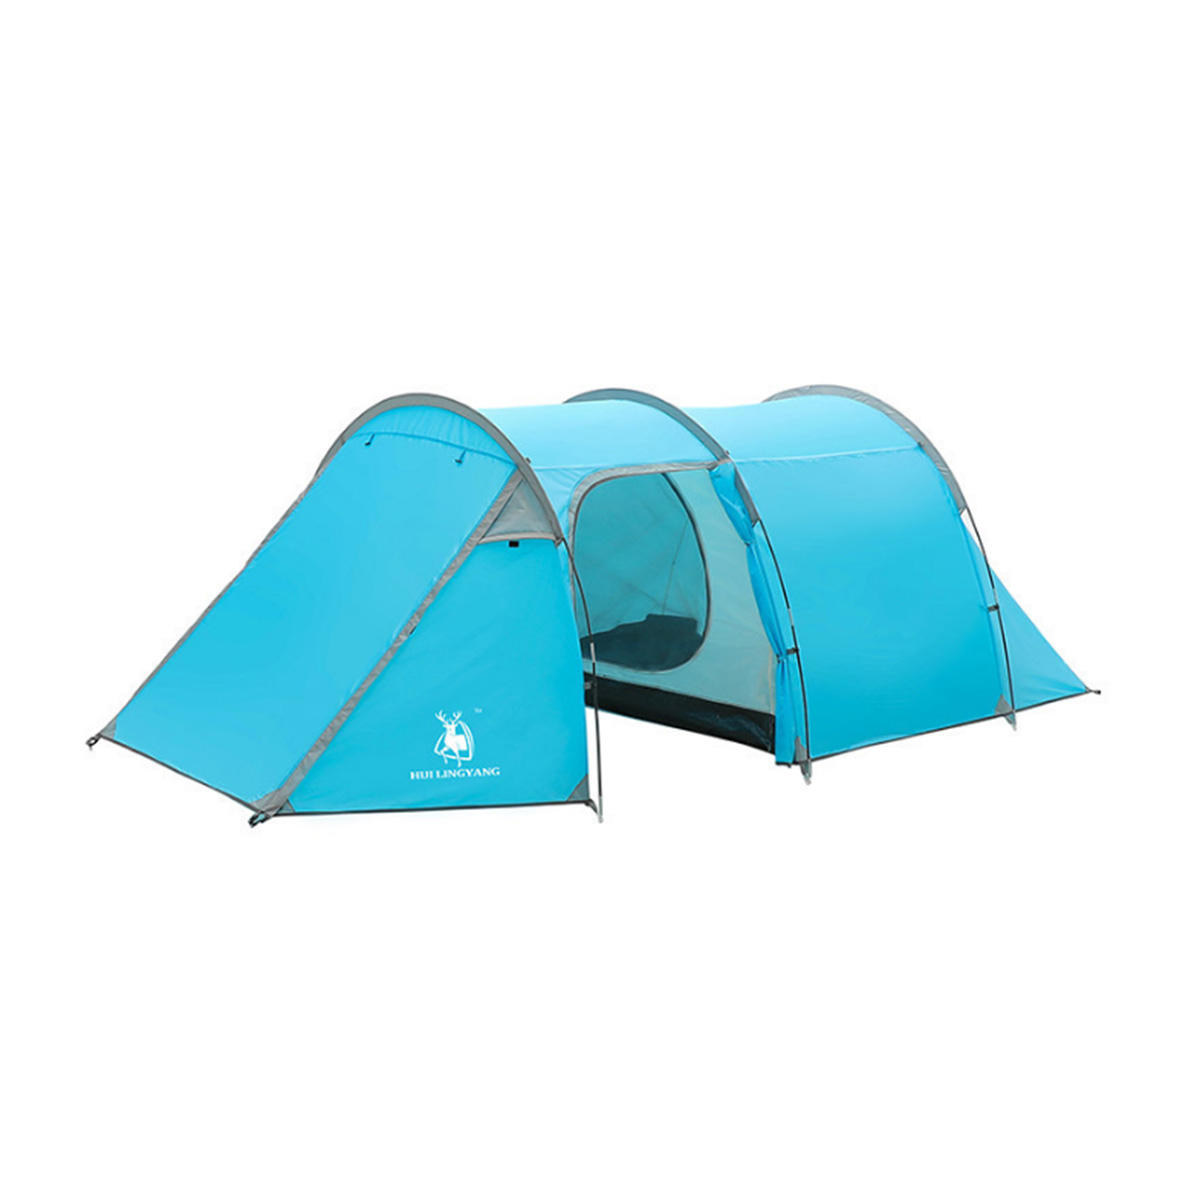 4-5 Person Camping Tent Travel Beach Tent Large Hiking Tent Waterproof Sunshade Awning 